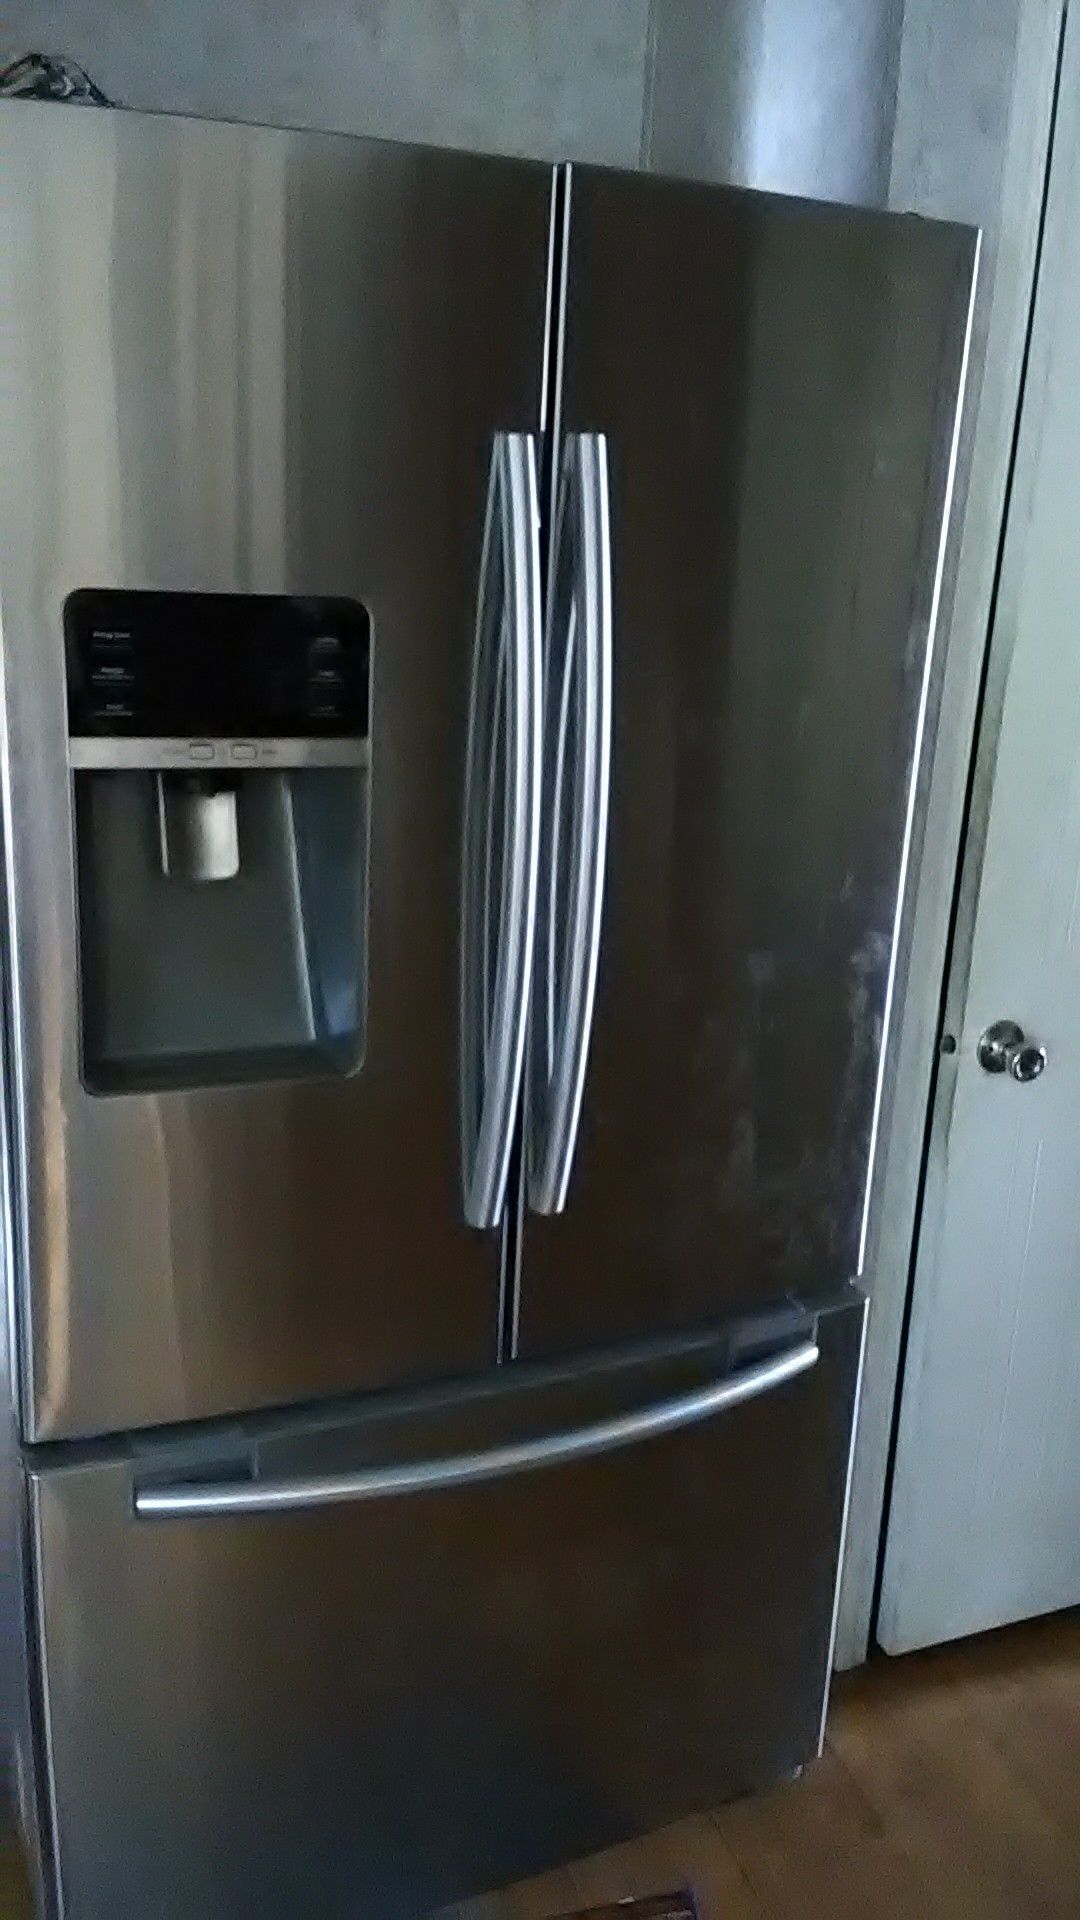 Samsung refrigerator and a pull-out drawer freezer